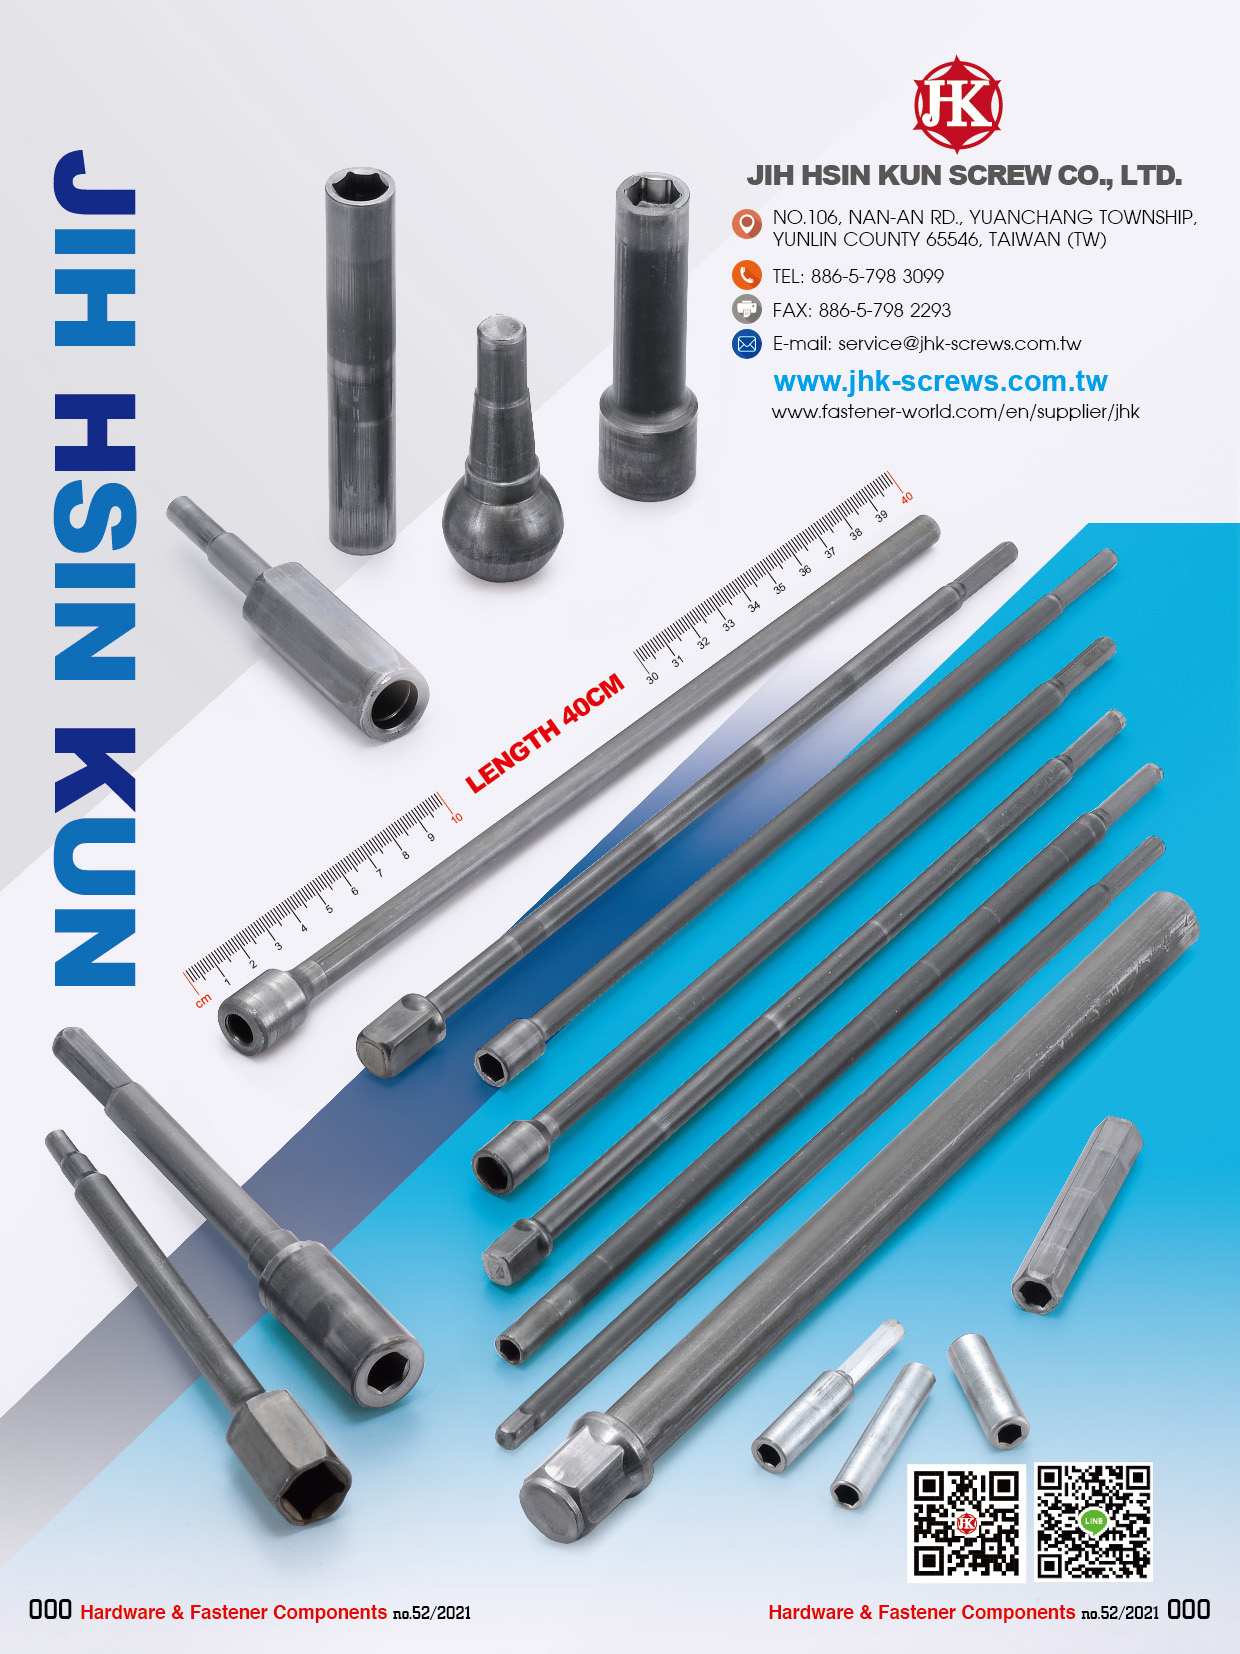 JIH HSIN KUN SCREW CO., LTD. , Large Size Parts, Hand Tool Socket, Auto Parts, Multi-Process Cold Forging, Special Parts, Lock Screws, Pan Head Screws, Cement Drill Head Screws, Screwdriver, Gear Tool, Hand Tool, Mousetrap Parts, Extension Bar, Auto Parts, Anchoring Screws, Bicycle Parts